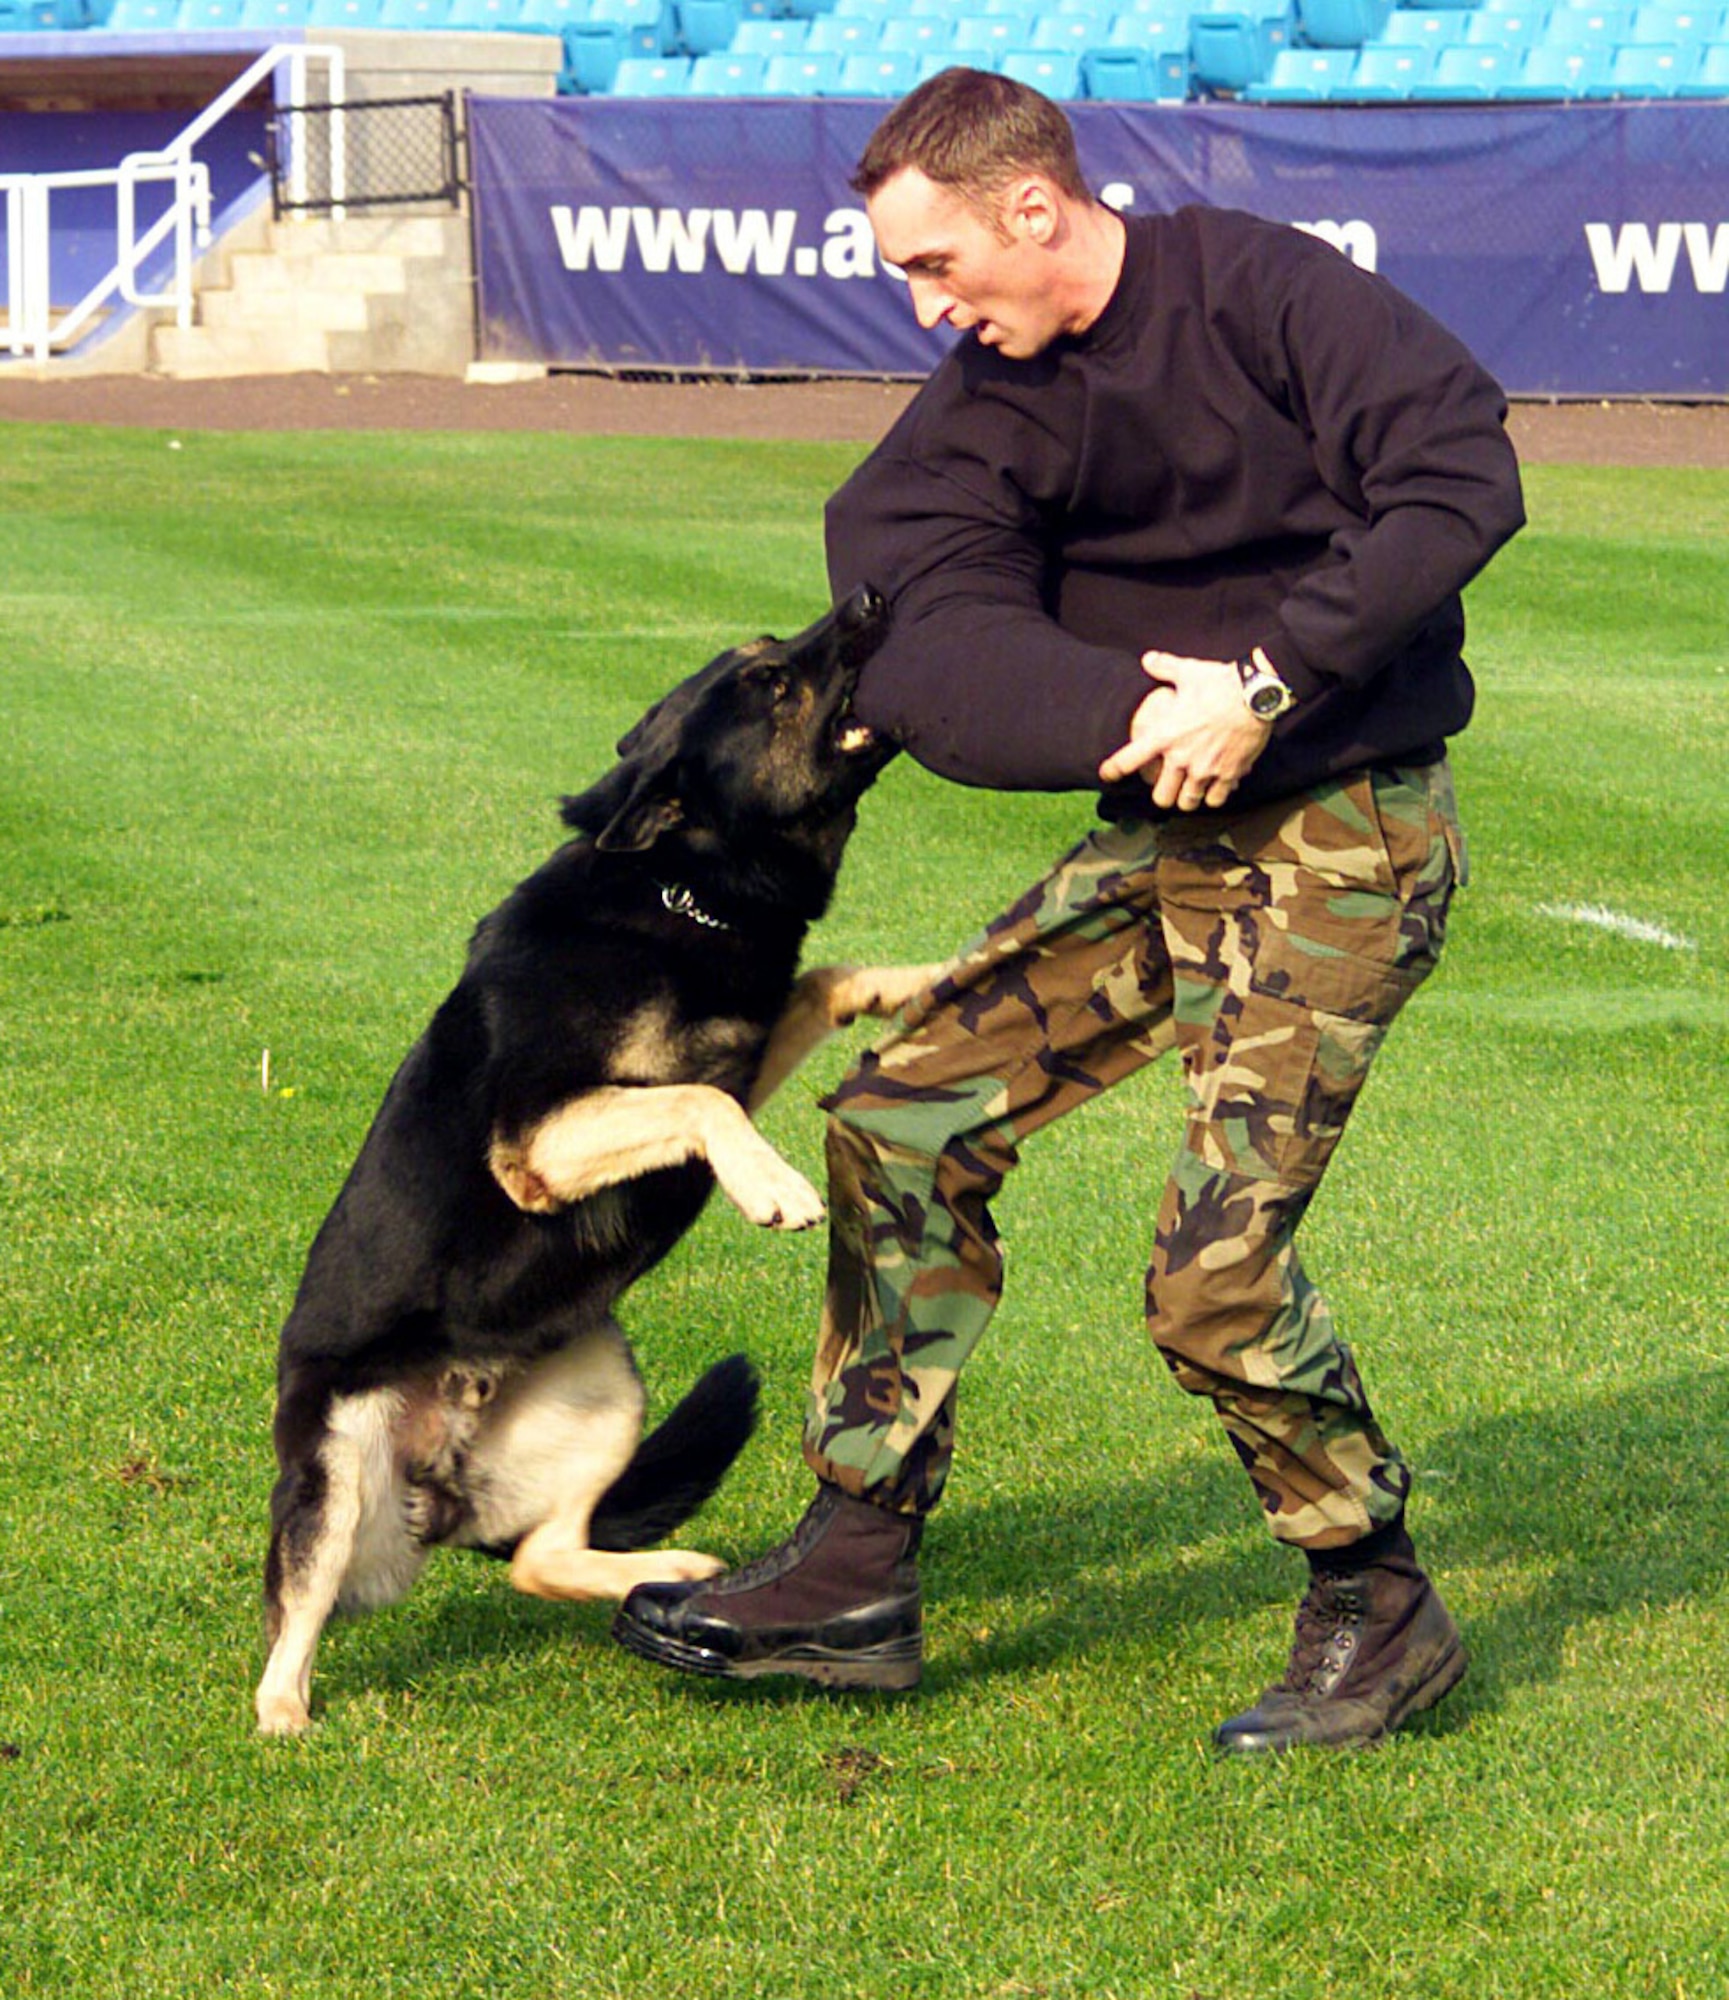 ATLANTIC CITY, N.J. -- Brian, a military working dog, apprehends teammate Staff Sgt. Justin Marshall during the criminal apprehension event at the U.S. Police Canine National Field Trials here.  The team, which also included Brian's handler, Staff Sgt. Jeremiah Jessen, scored a 333 out of 340 points in the event, finishing in fourth place out of 127 teams.  The team is part of the 28th Security Forces Squadron military working dog section at Ellsworth Air Force Base, S.D.  (U.S. Air Force photo by Airman 1st Class Jason Piatek)